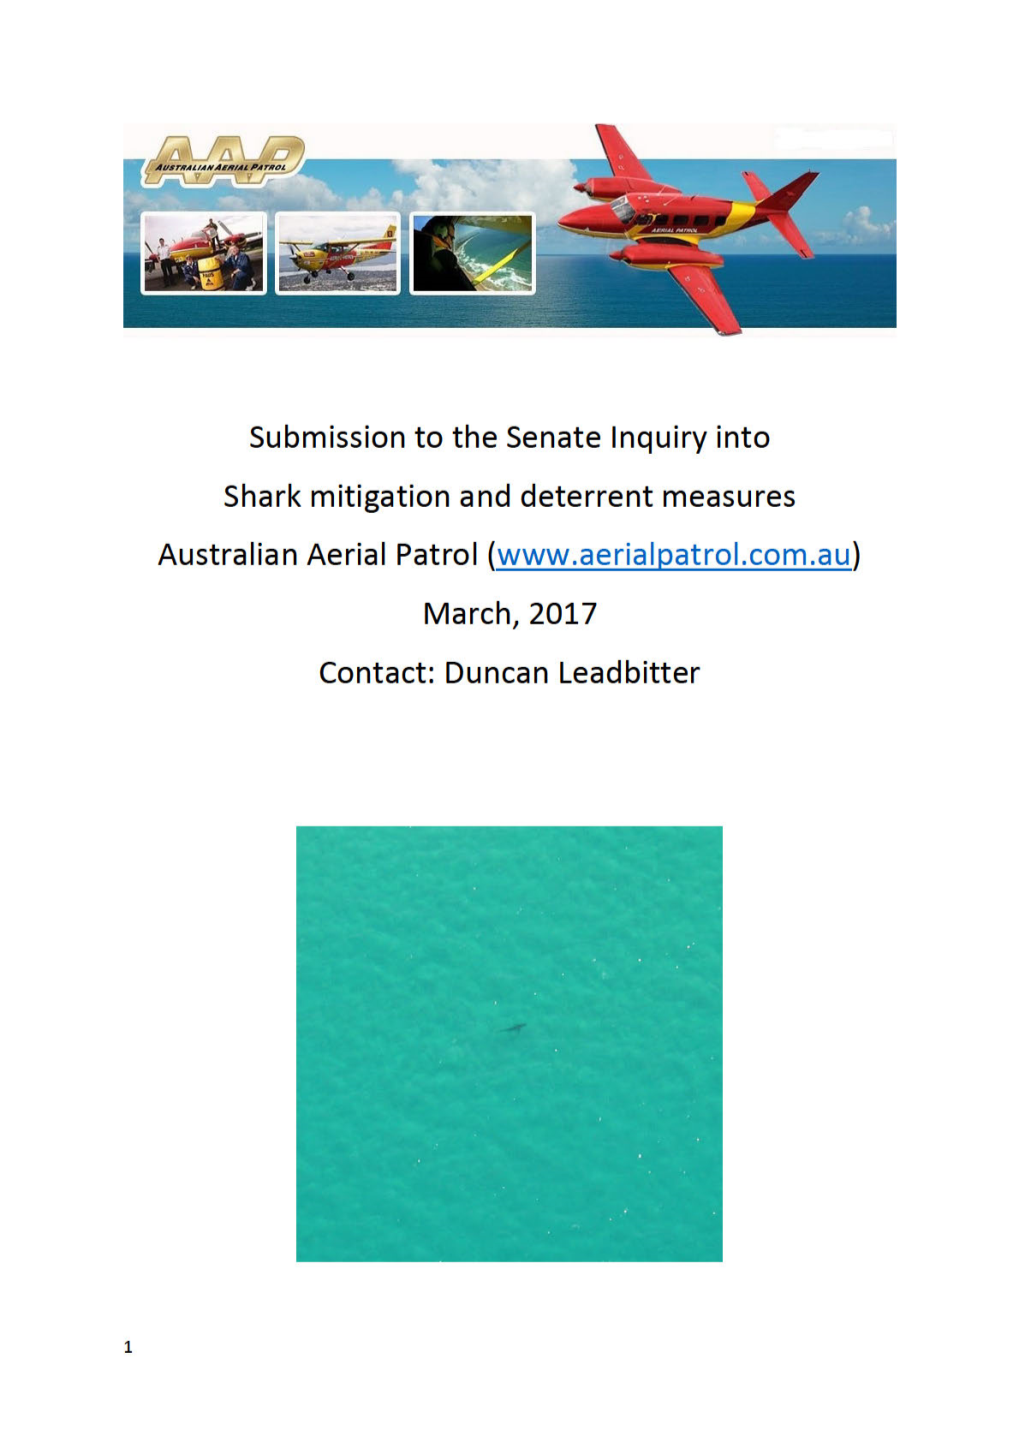 Submission to the Senate Inquiry Into Shark Mitigation and Deterrent Measures Australian Aerial Patrol (